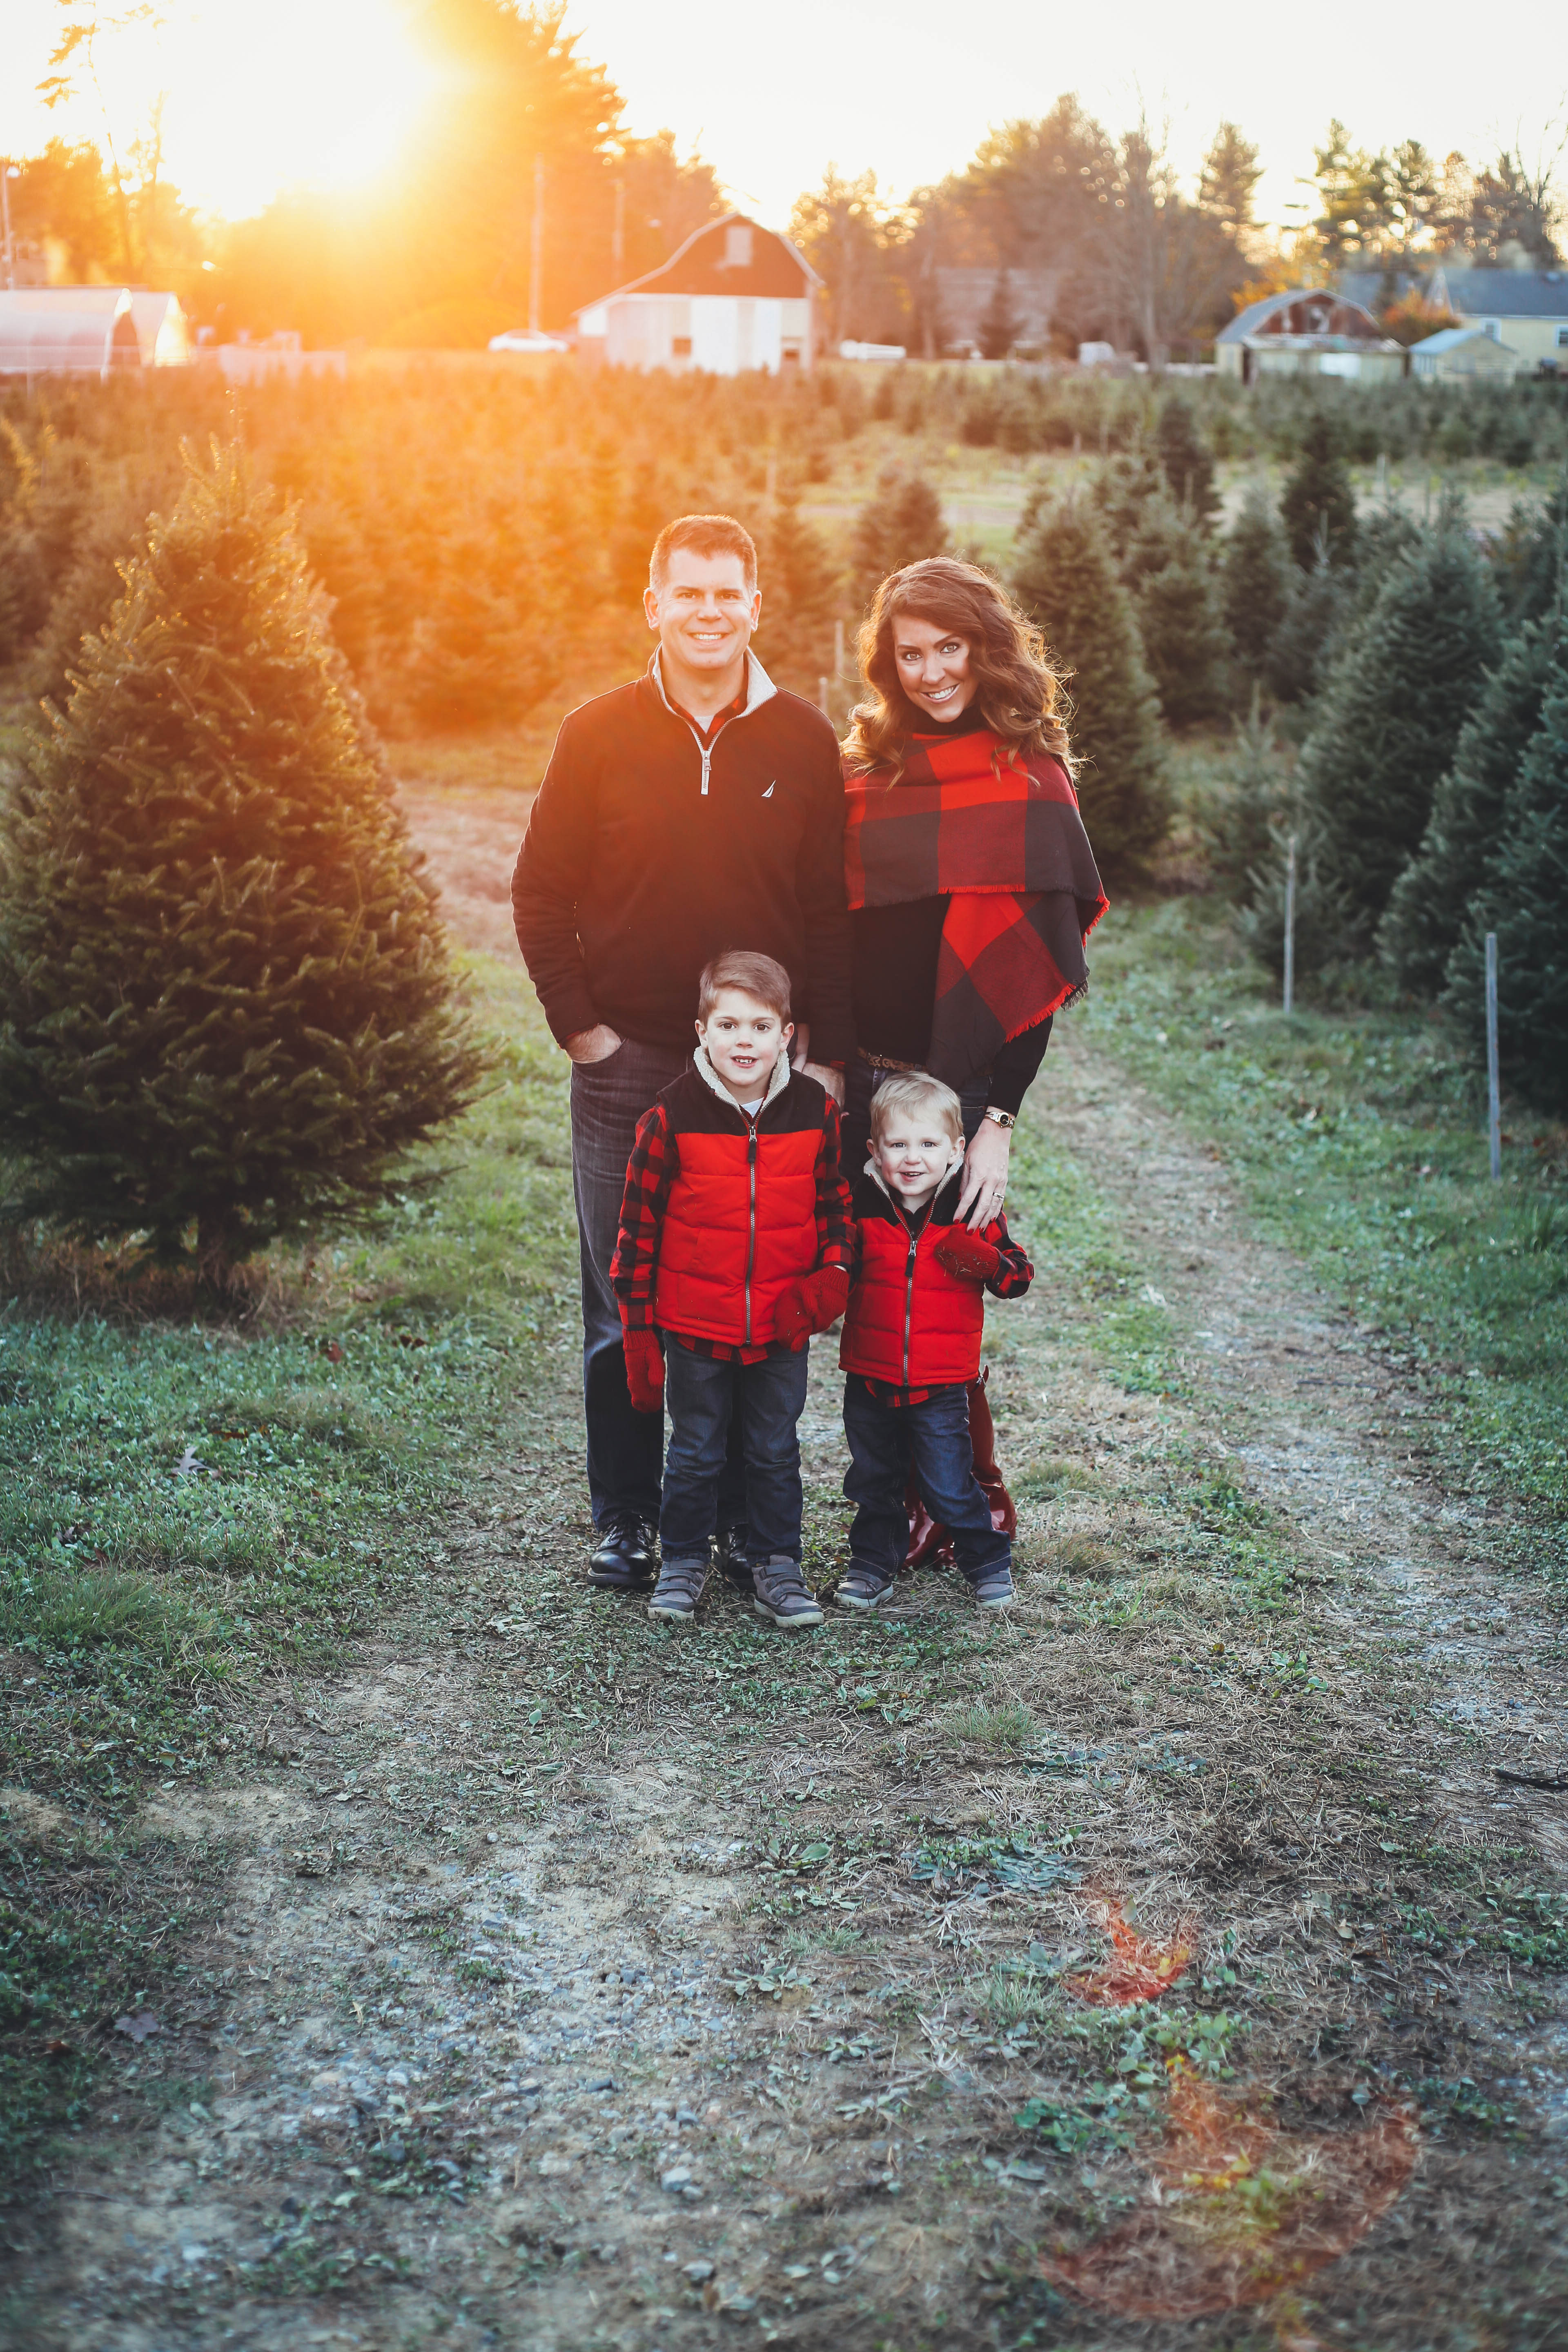 Merry Christmas + Tree Farm Family Pictures - From The Family With Love